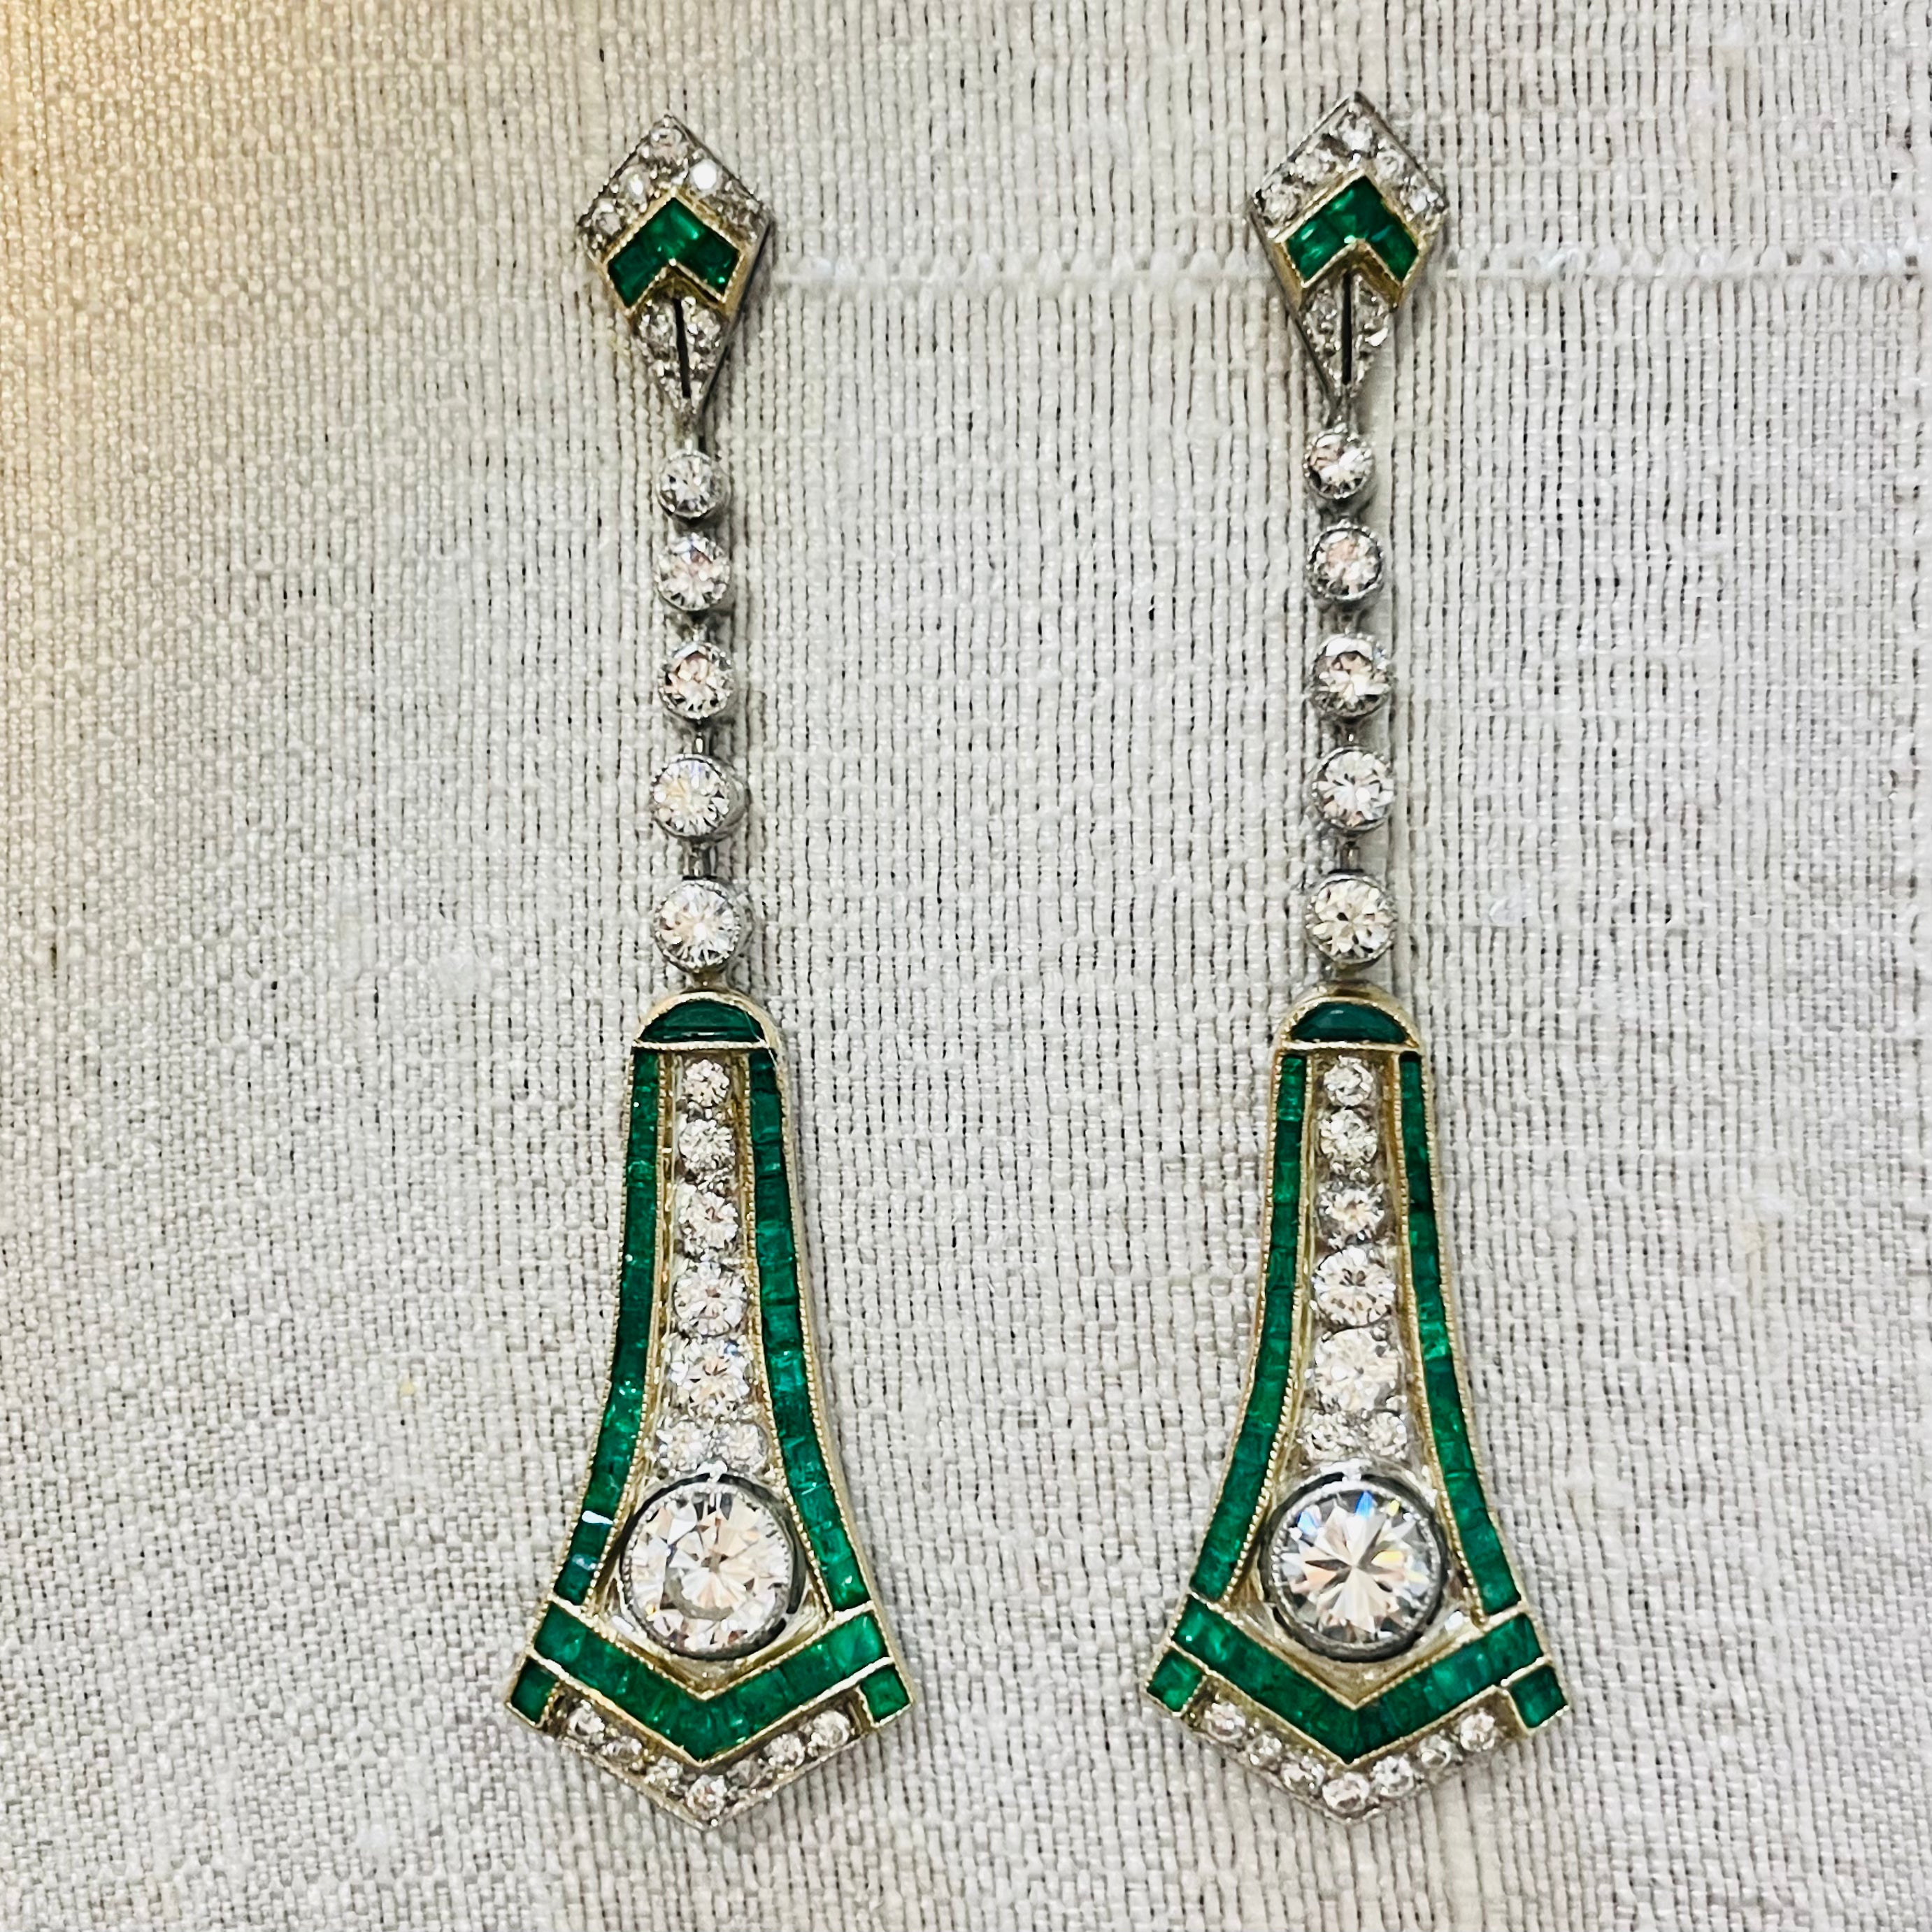 Amazing Art Deco Style Long Emerald and Diamond Drop Earrings in 18K Yellow Gold and Platinum